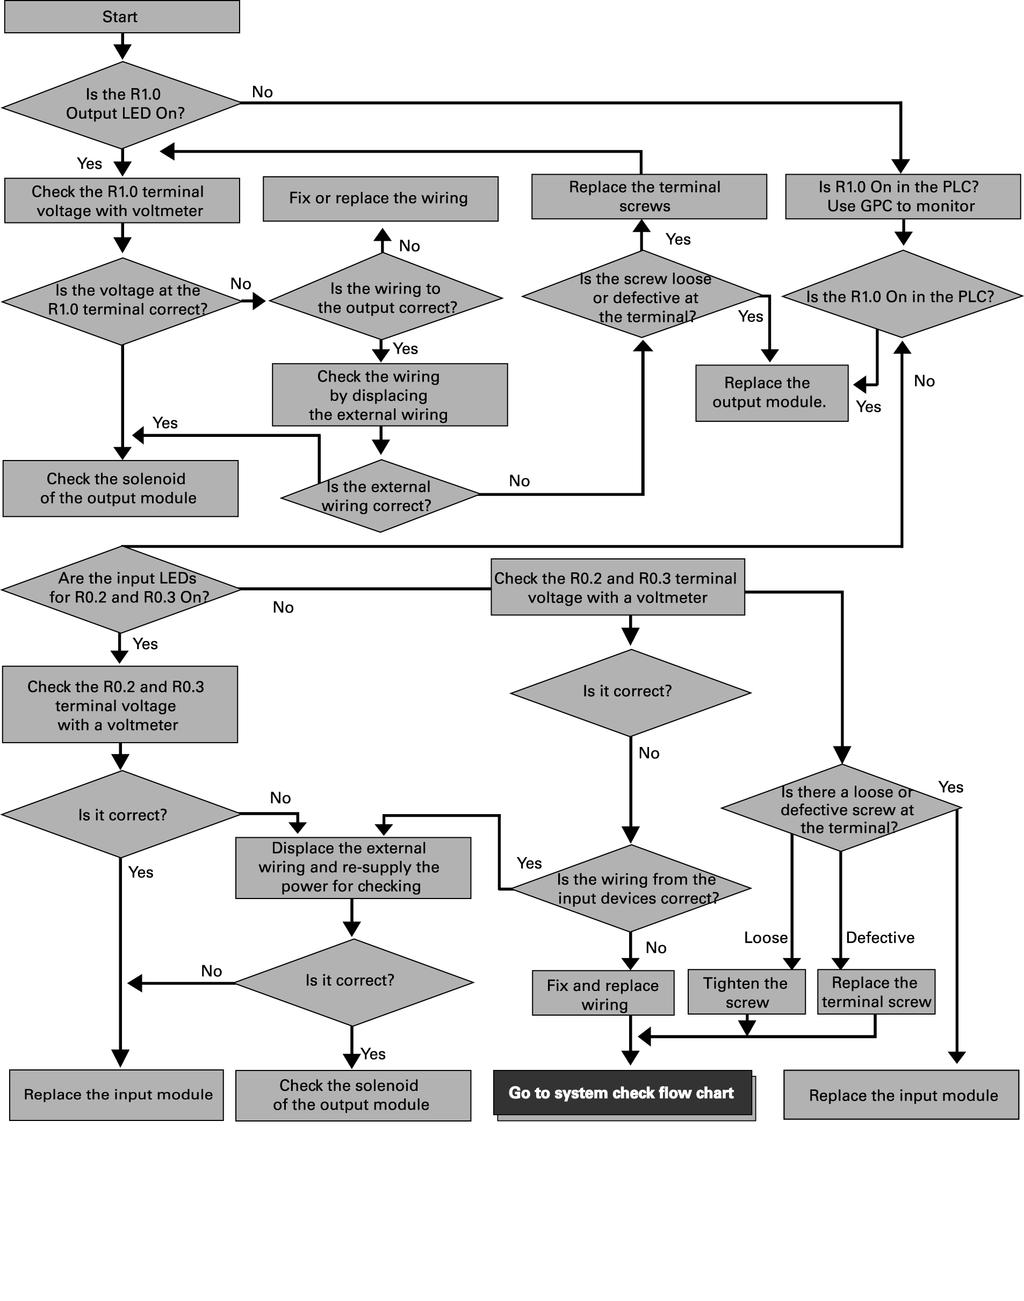 I/O check flow chart This page presents an example of a